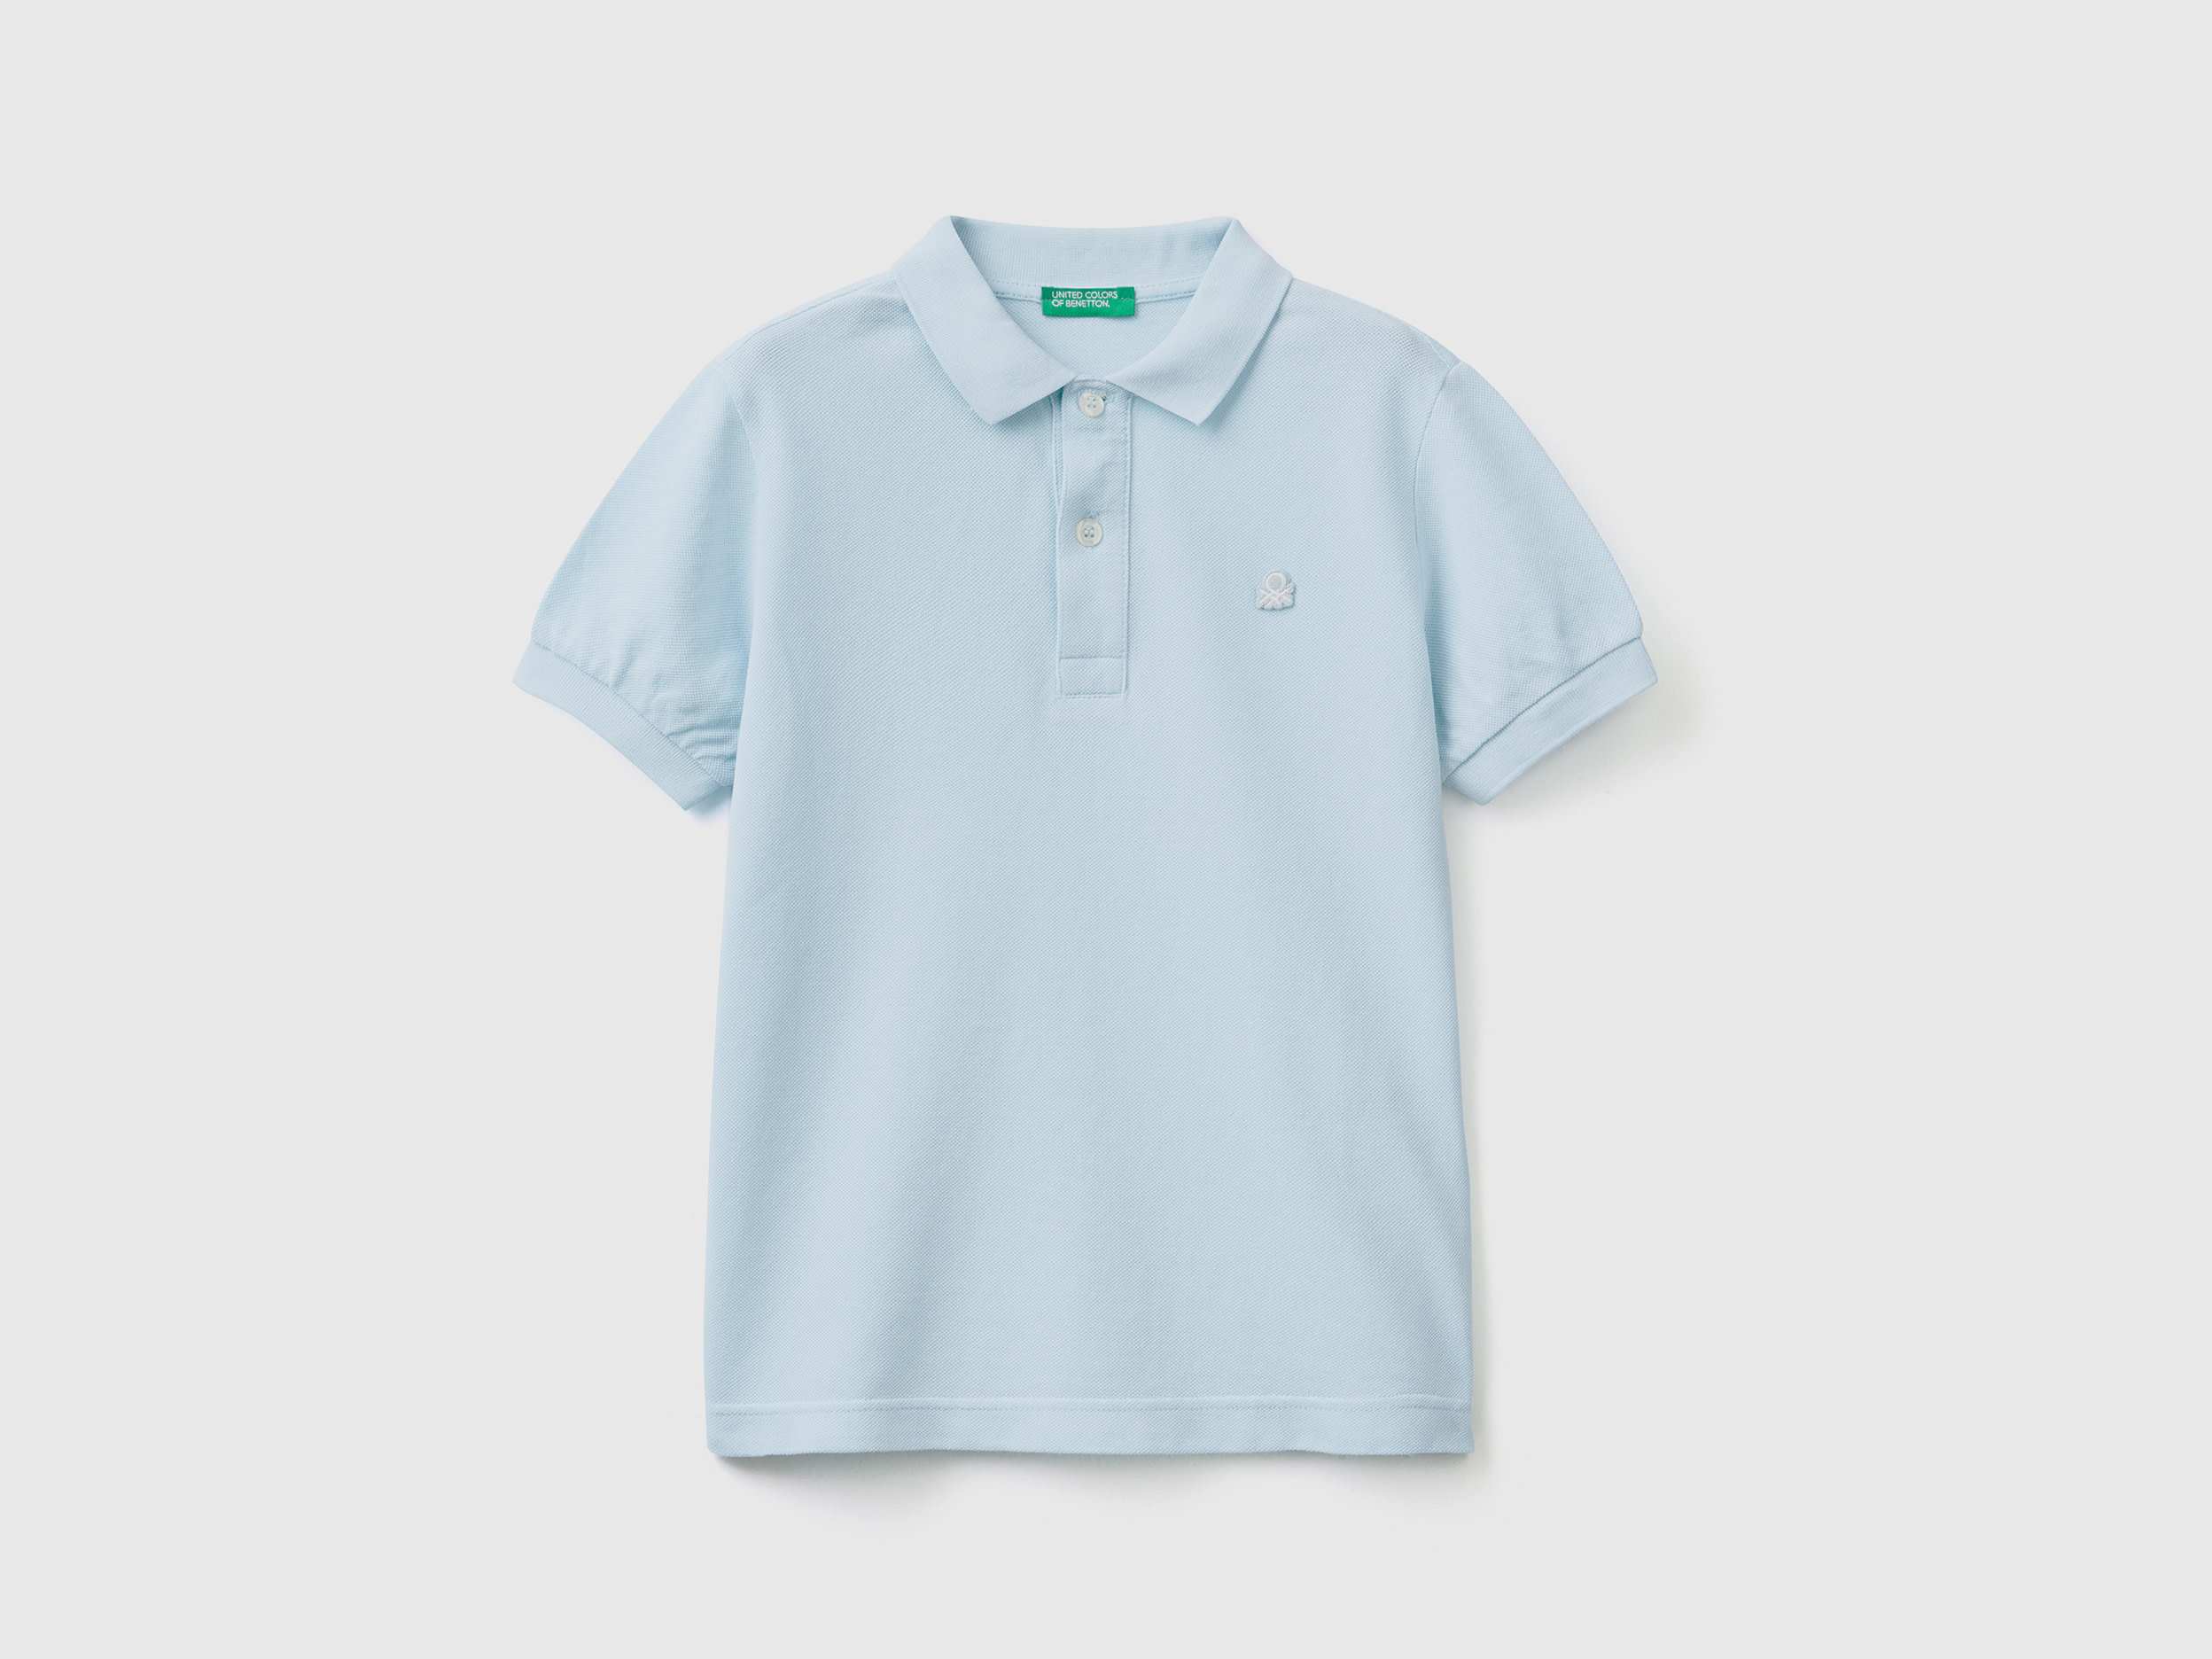 Image of Benetton, Slim Fit Polo In 100% Organic Cotton, size M, Sky Blue, Kids